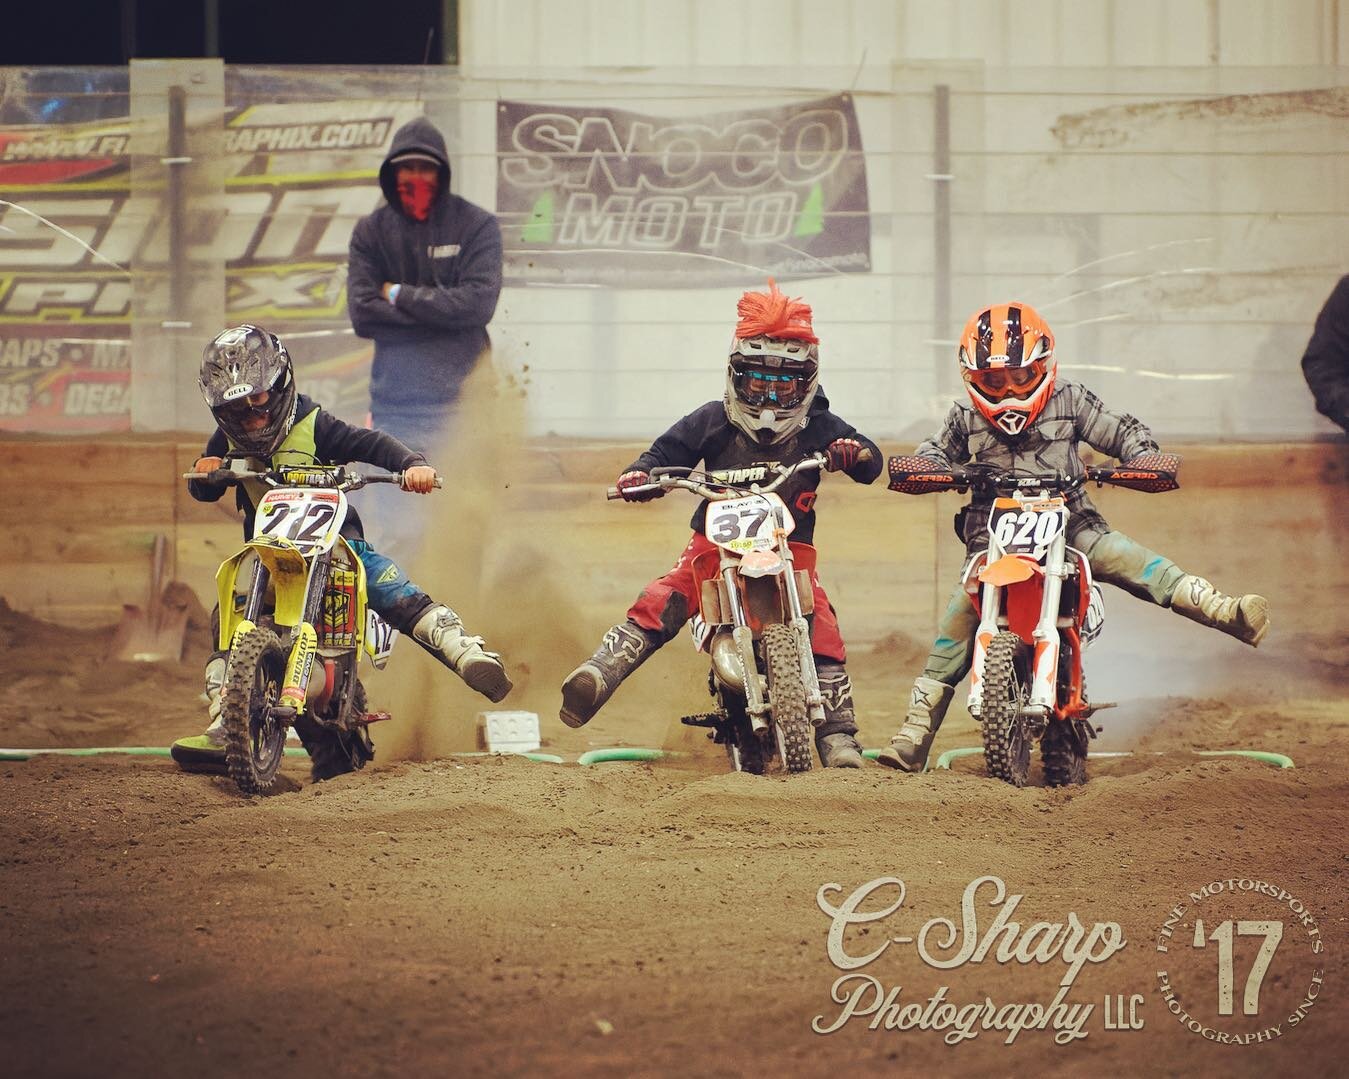 Legs everywhere! Not too late to make a deposit for photos of your racing exploits from any 2021 round at @whrmotorsports  #barnracing (#Arenacross or #flattrack)! Deposit link in and here: https://www.c-sharpphoto.com/deposit/action-photos-deposit #